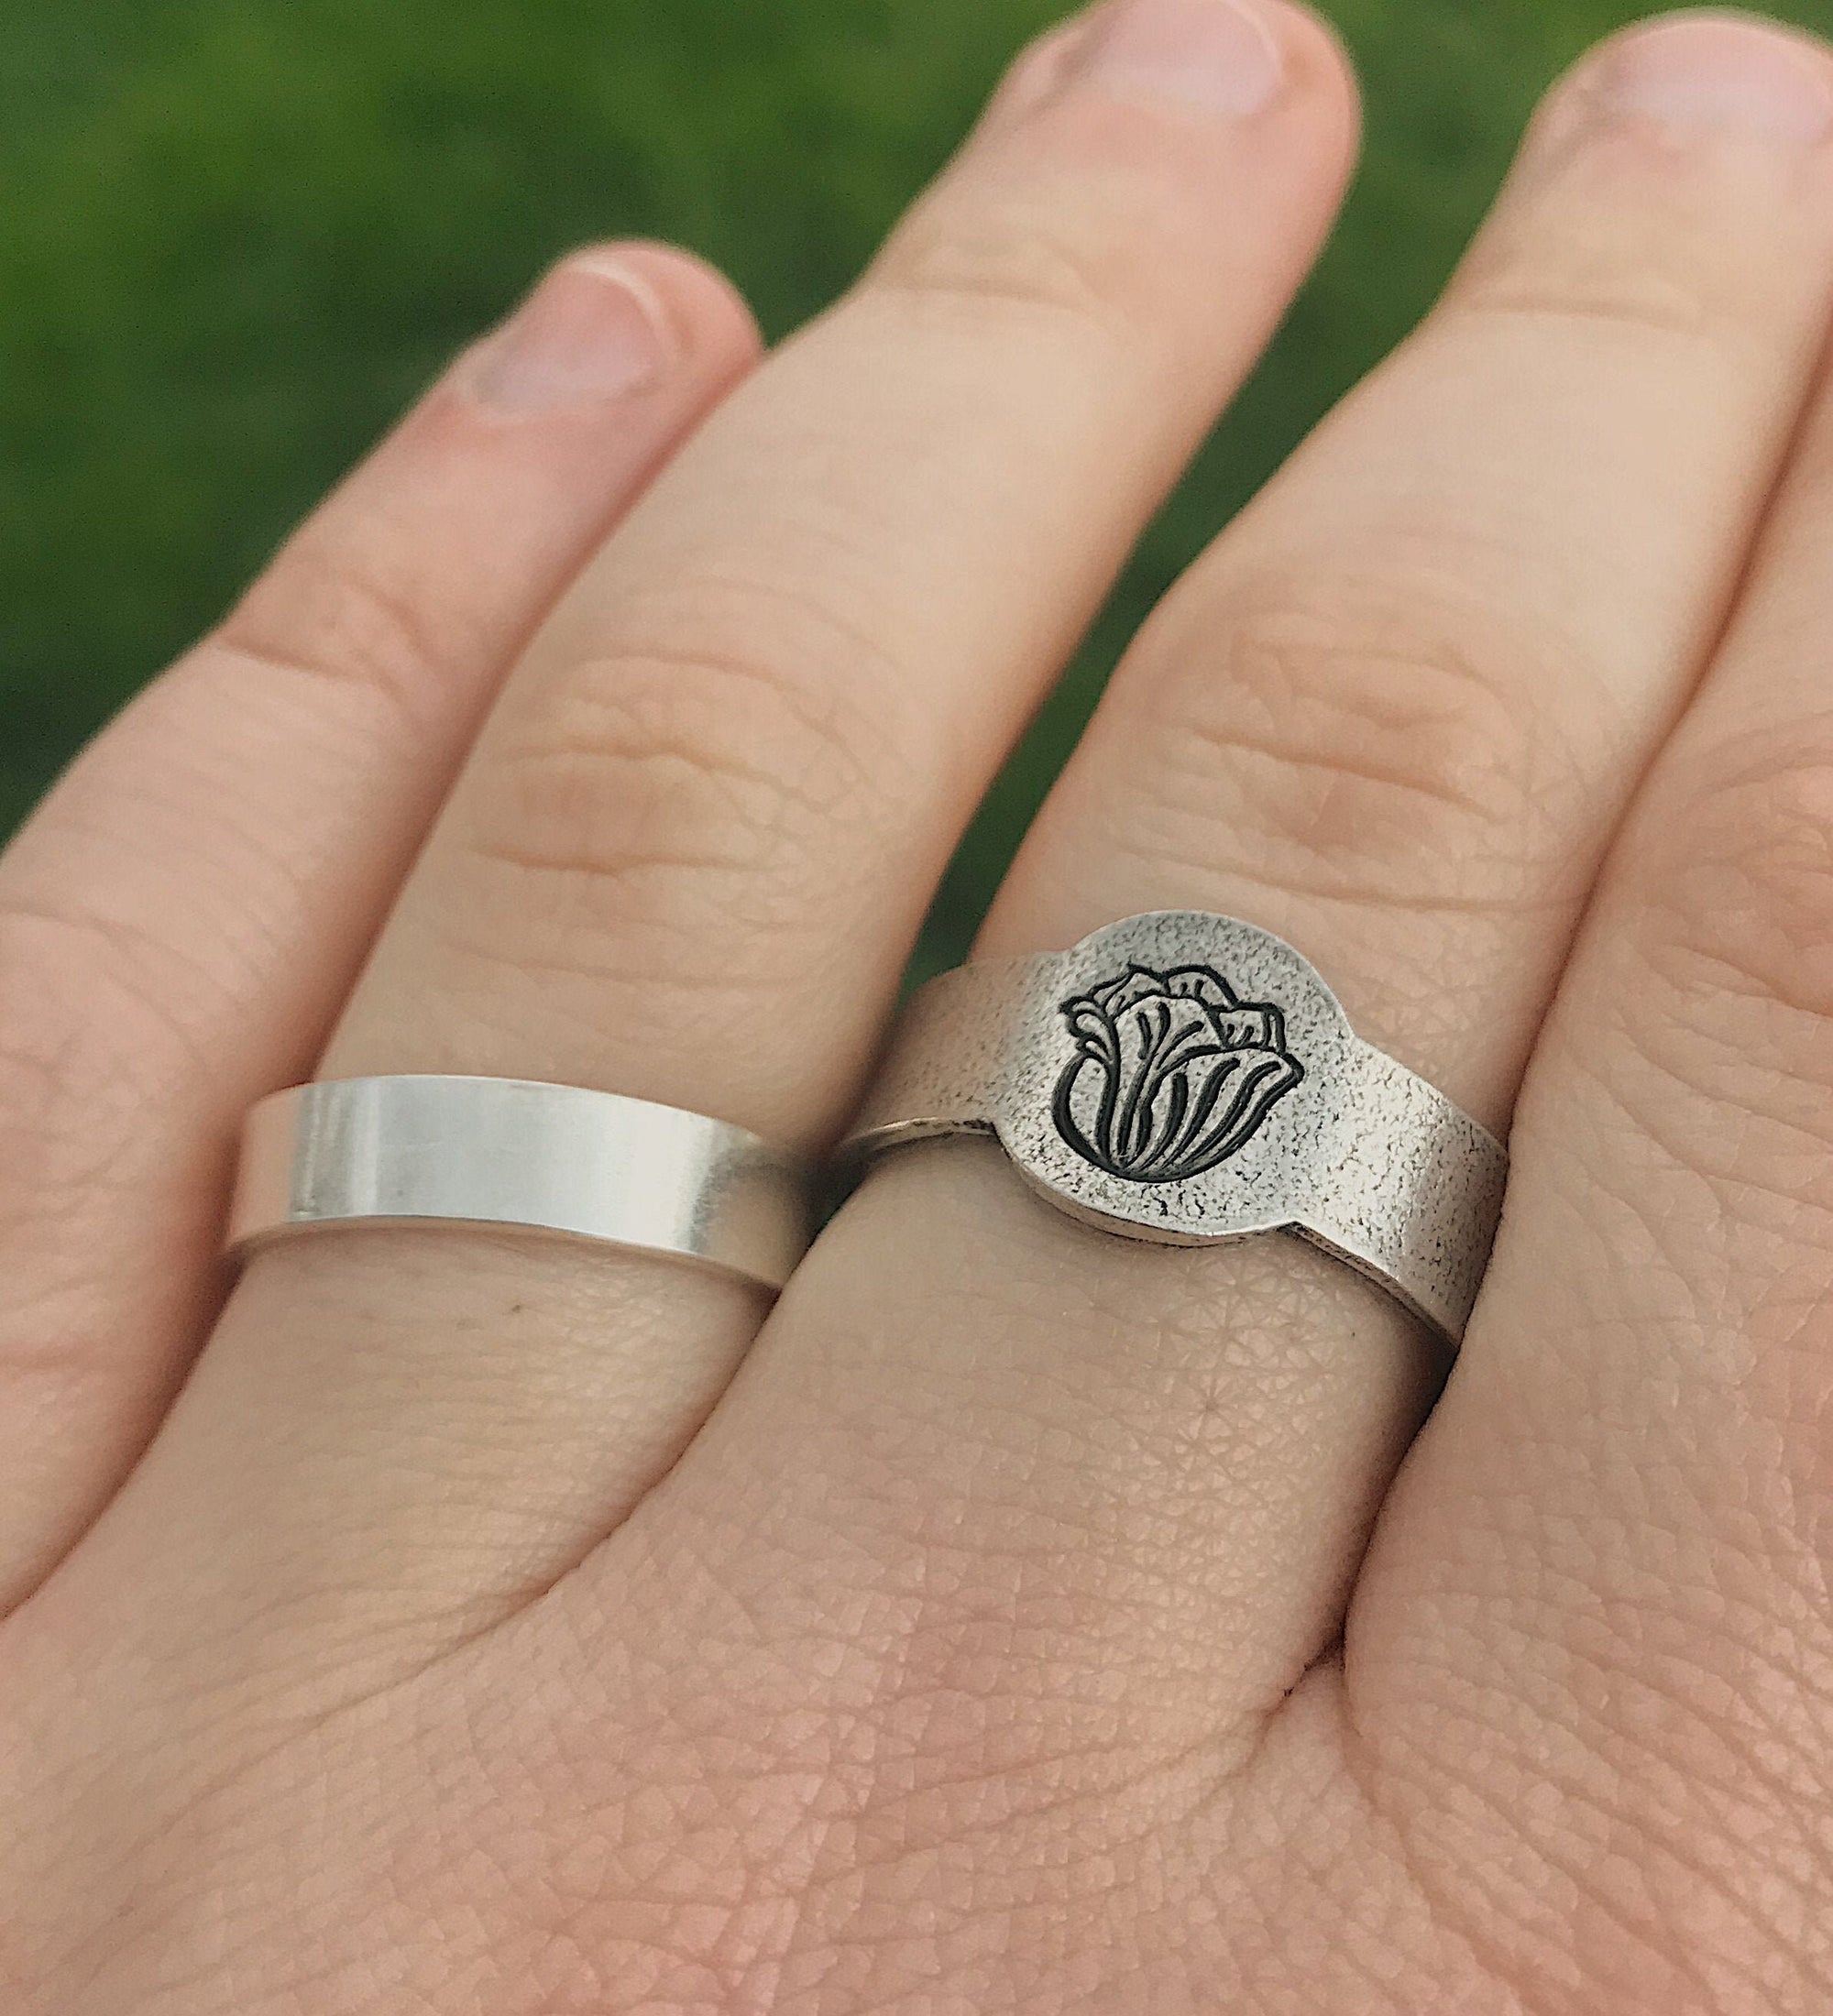 Tulip Floral Signet Ring | Tulip Jewelry | Rustic Birth Flower Ring | Best Friend Birthday Gifts | Mother's Day Gift | Best Friend Ring